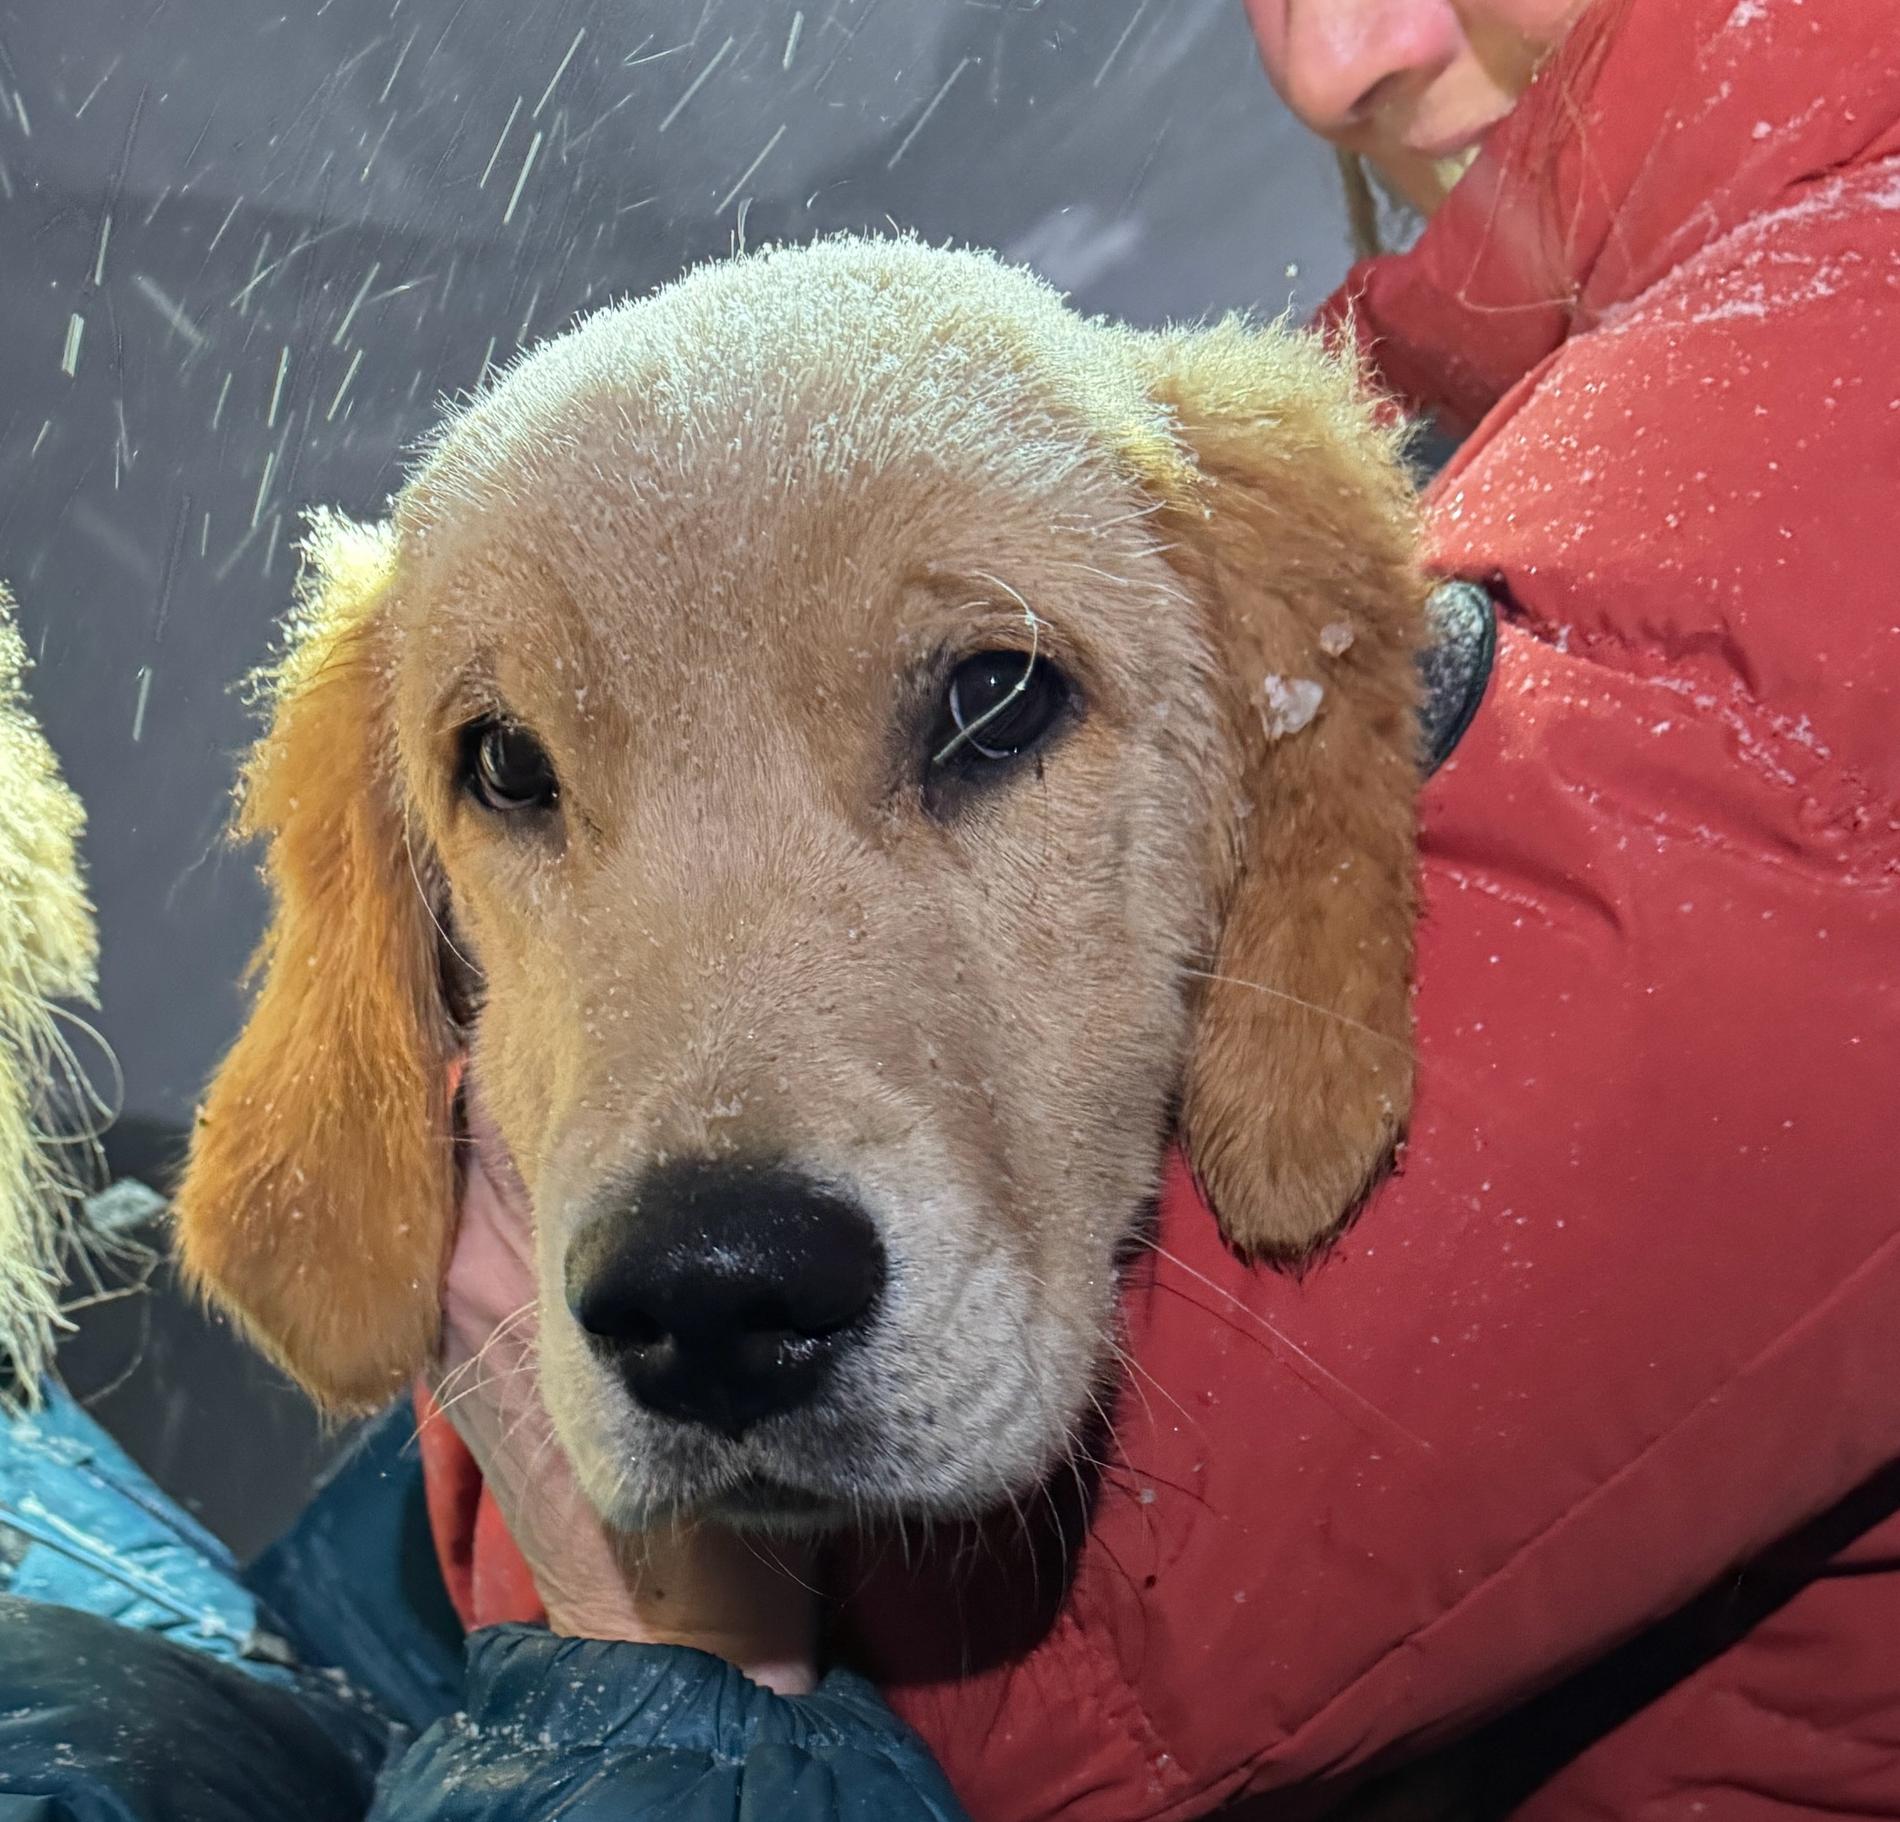 Teddy the puppy was found two days later in the snow: – Absolutely unbelievable